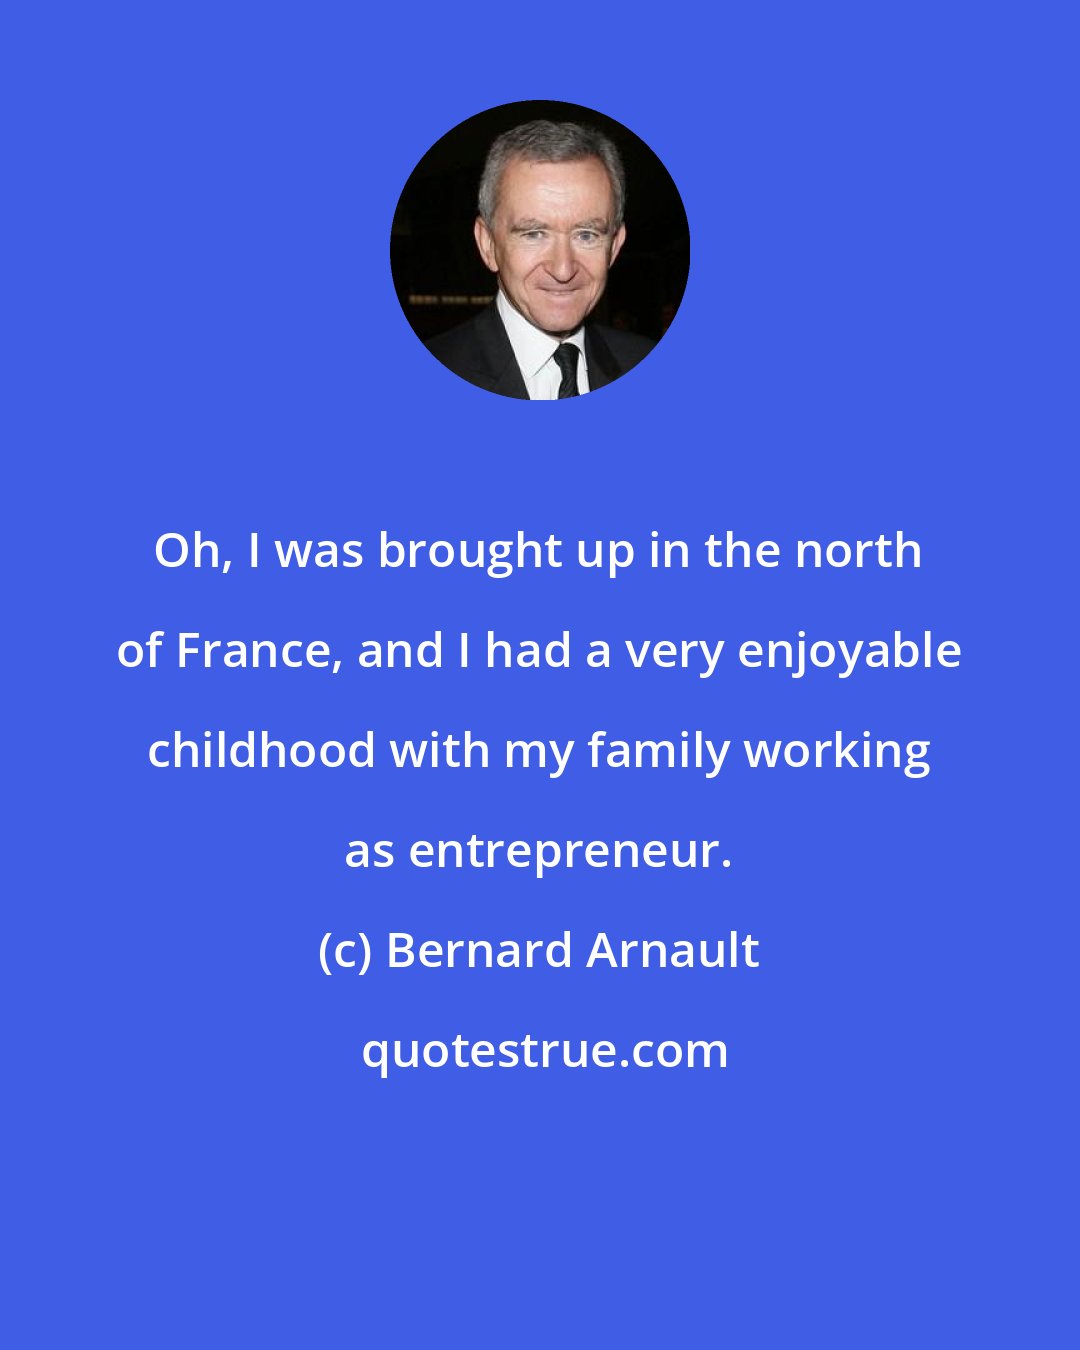 Bernard Arnault: Oh, I was brought up in the north of France, and I had a very enjoyable childhood with my family working as entrepreneur.